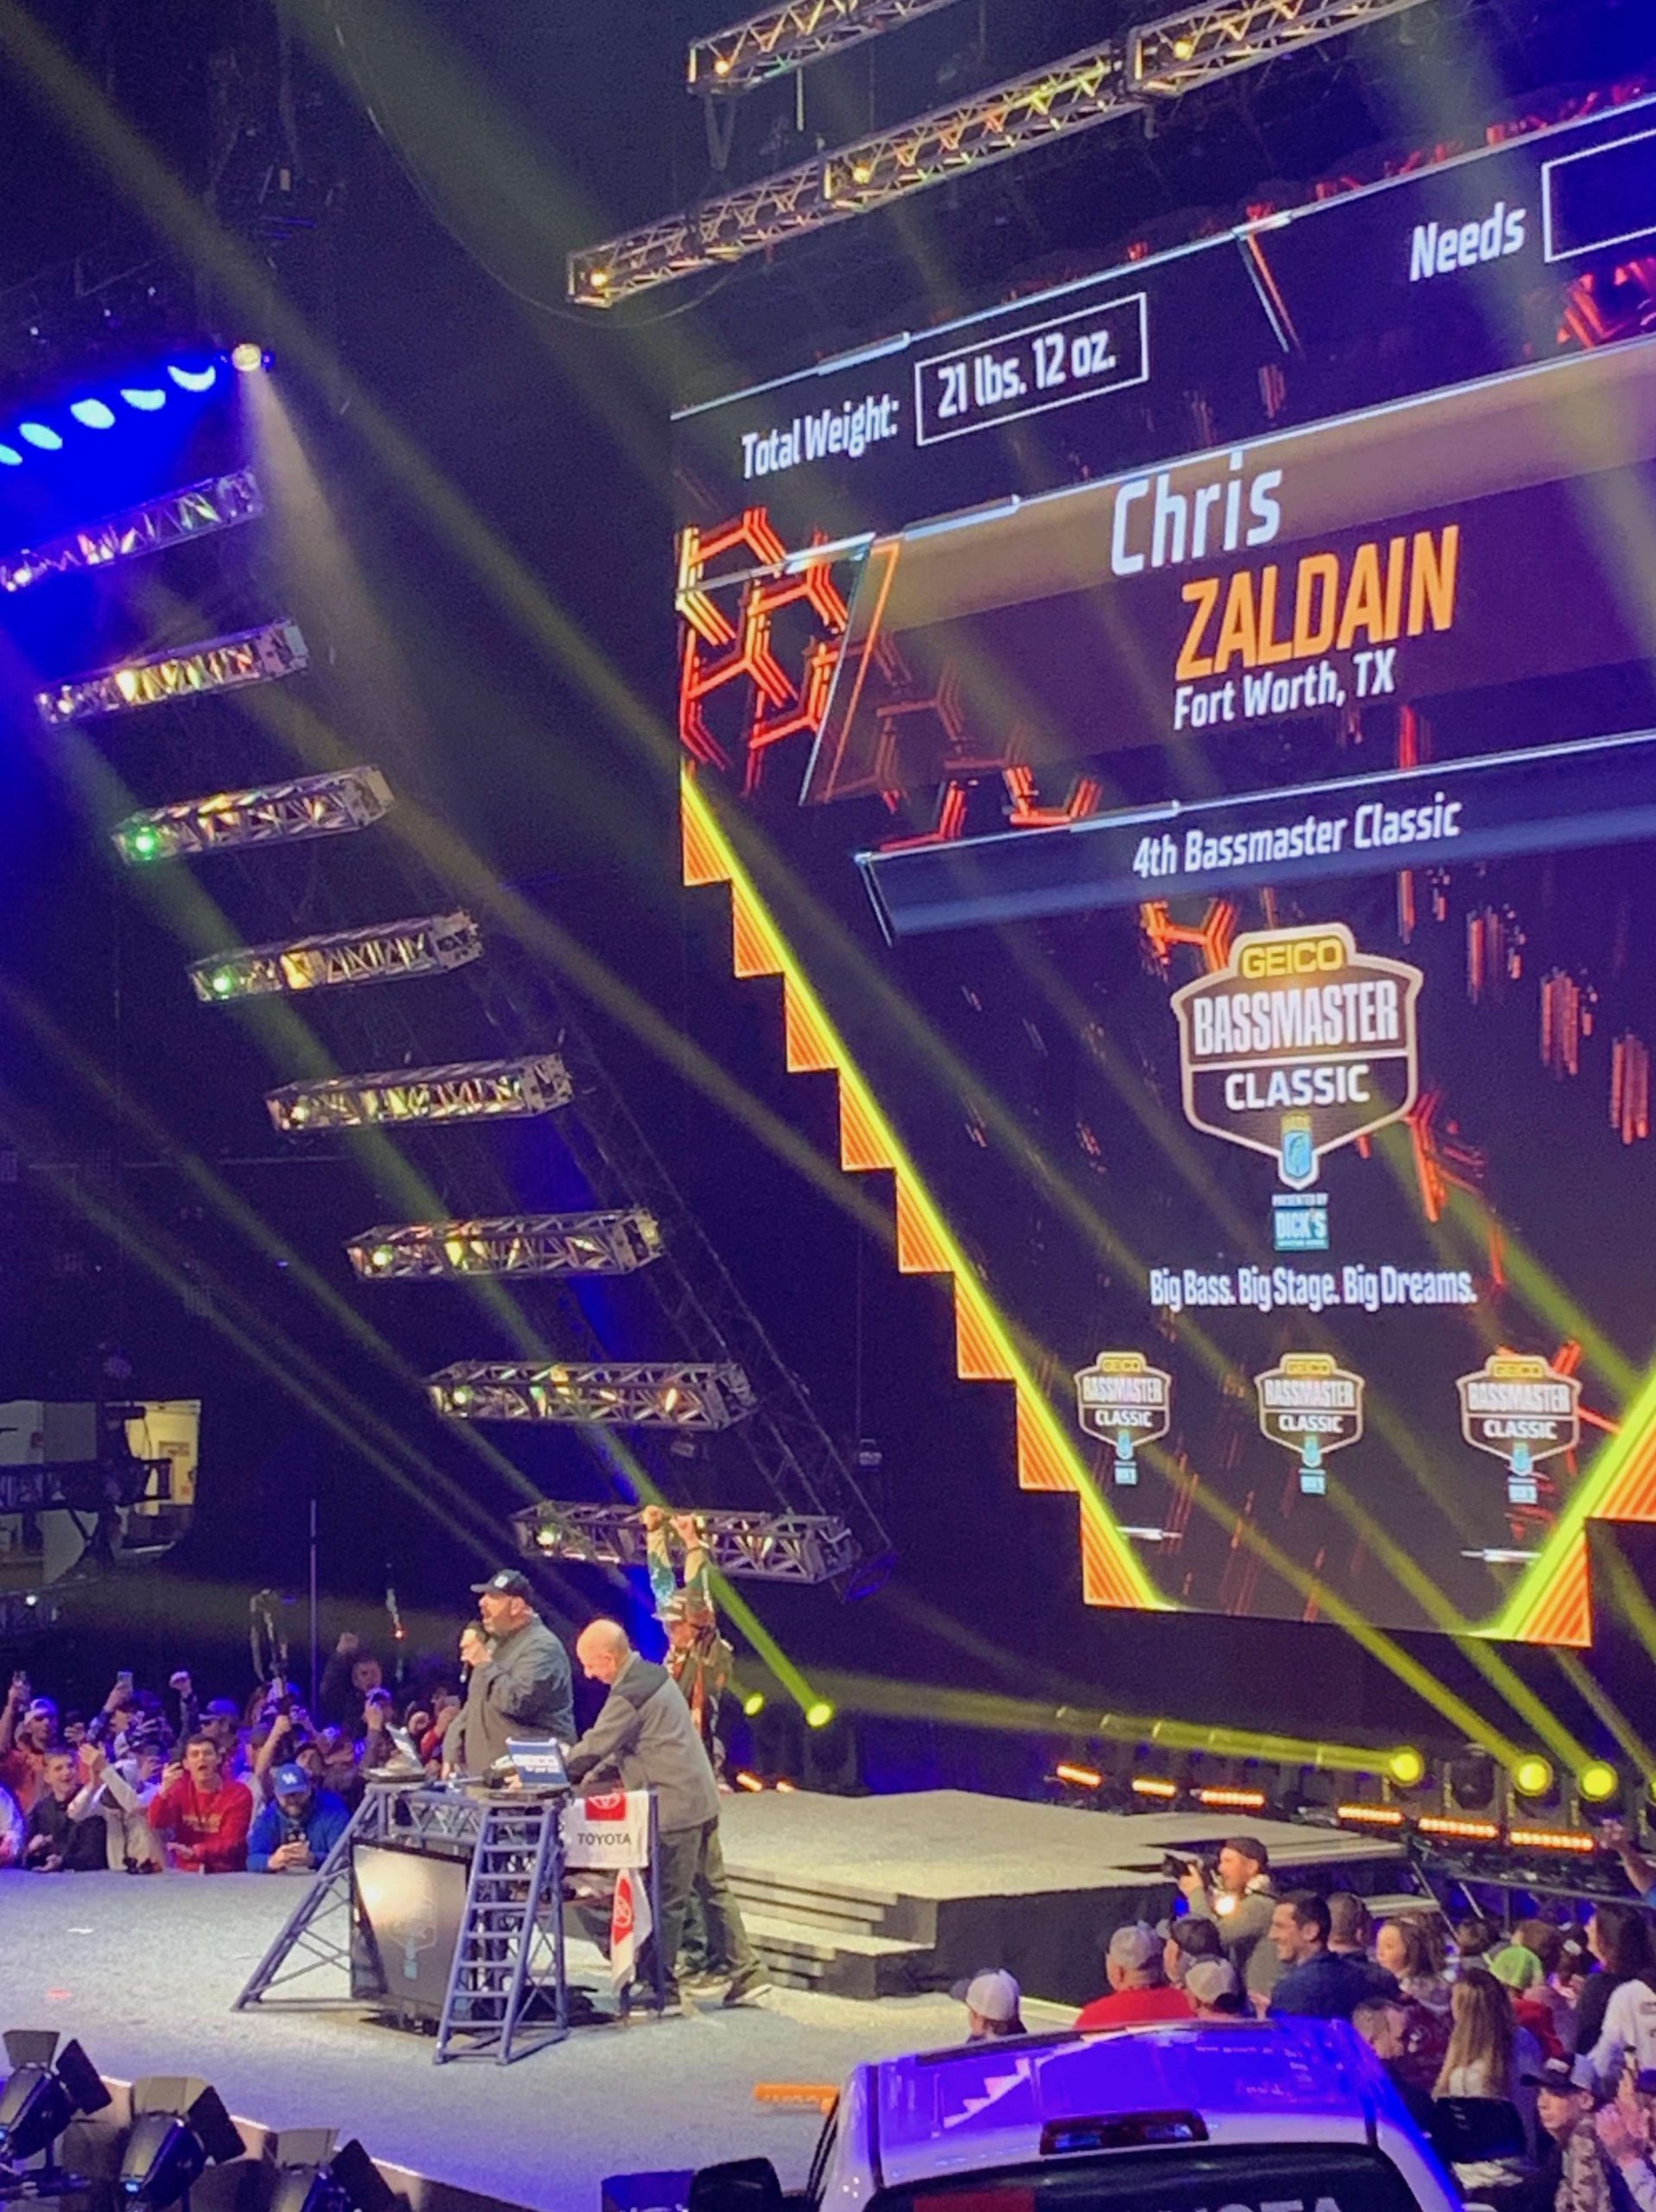 He witnessed Chris Zaldain weighing the biggest bag of the tournament of more than 21 pounds.